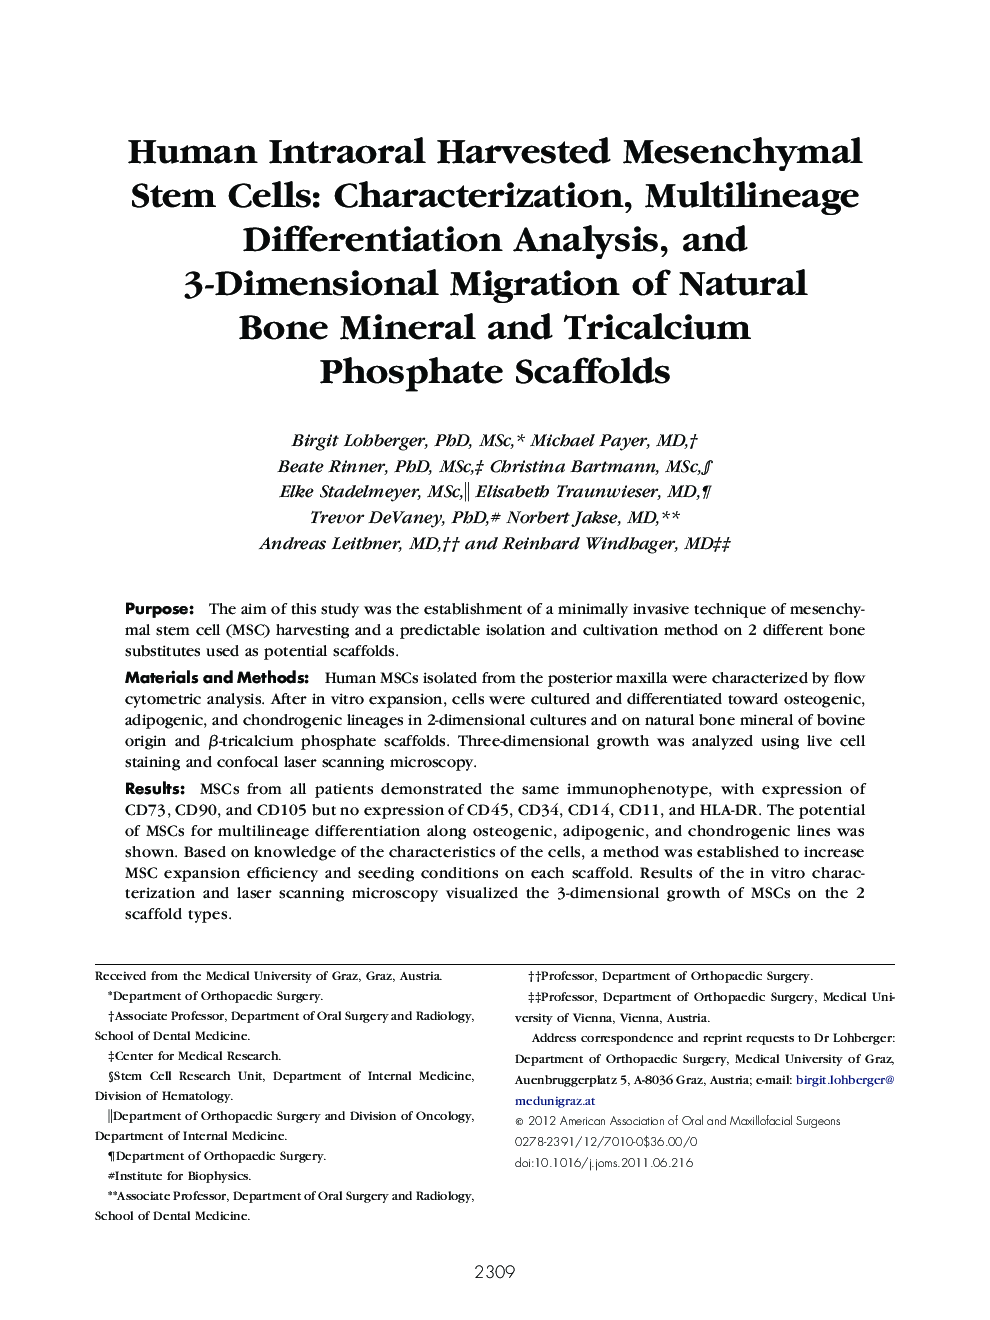 Human Intraoral Harvested Mesenchymal Stem Cells: Characterization, Multilineage Differentiation Analysis, and 3-Dimensional Migration of Natural Bone Mineral and Tricalcium Phosphate Scaffolds